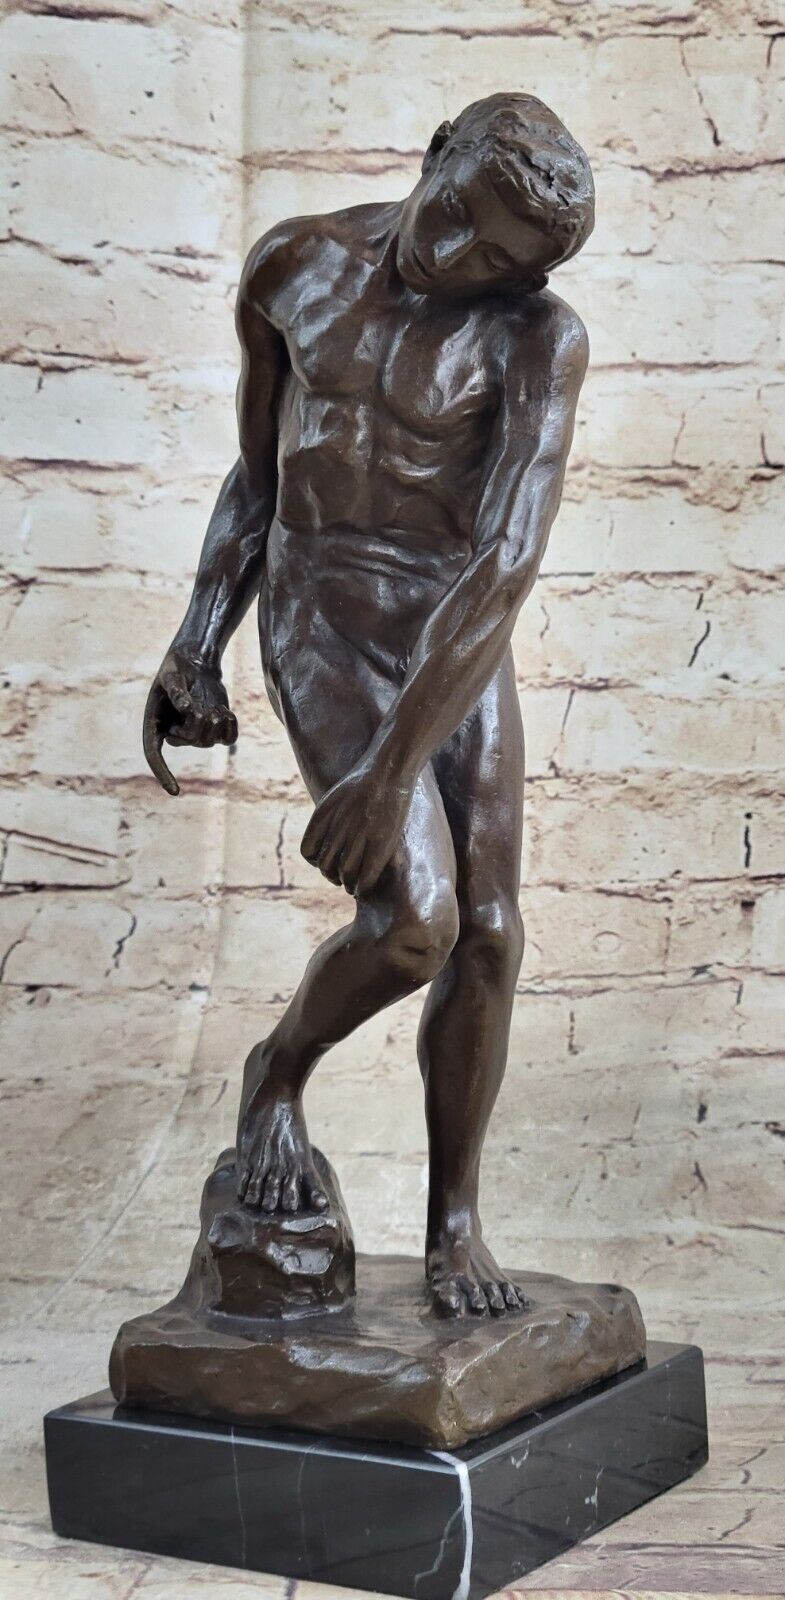 Handcrafted bronze sculpture Nude German Marble Of Age Rodin Male Nude Artwork